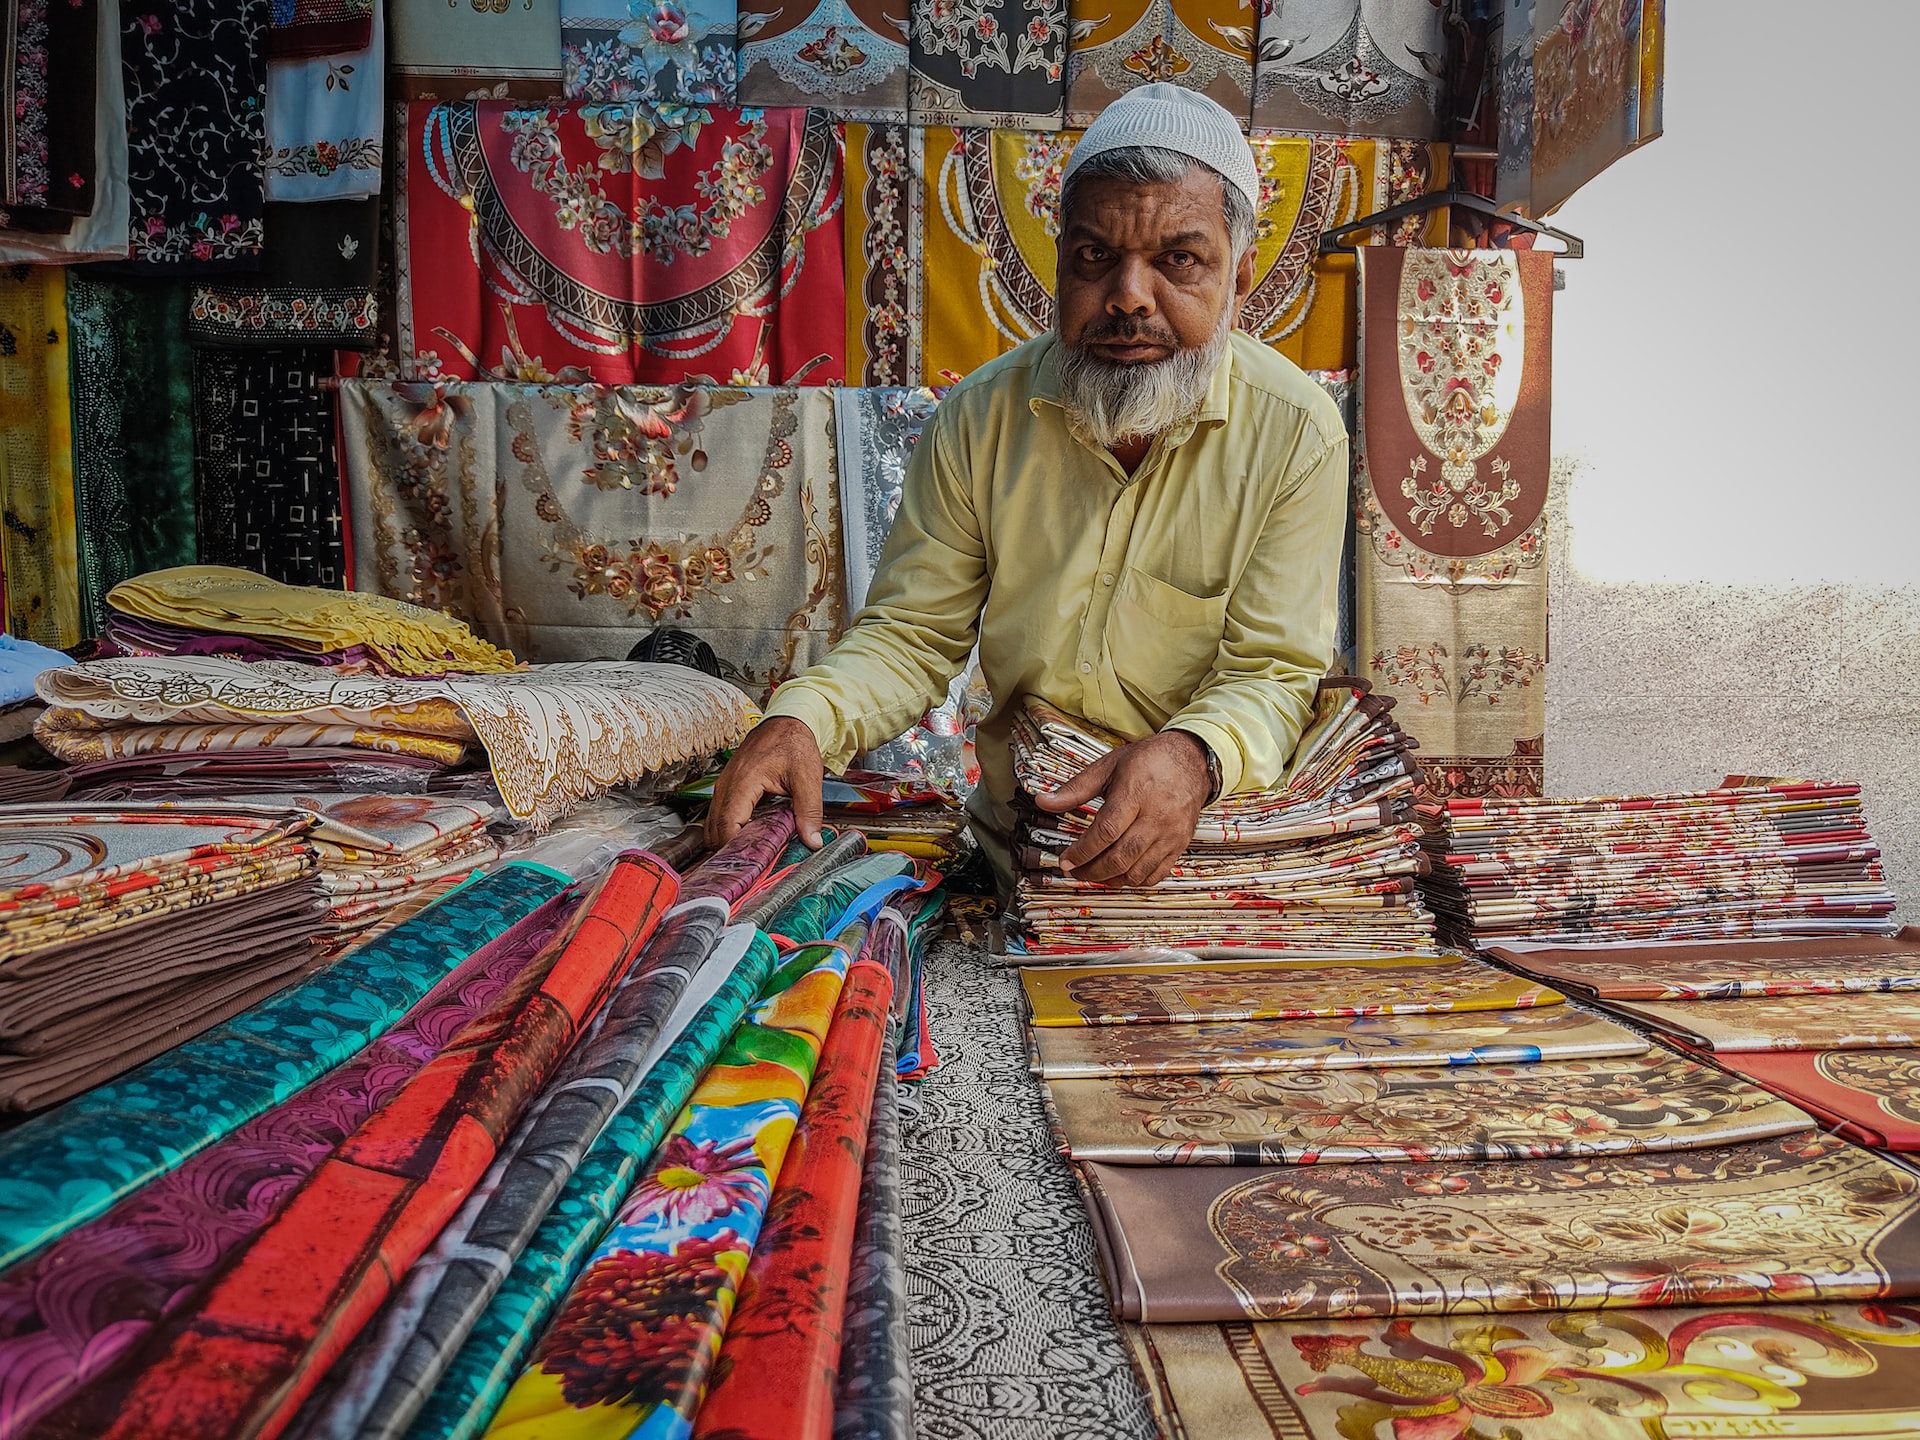 Man selling shawls in India out of storefront.